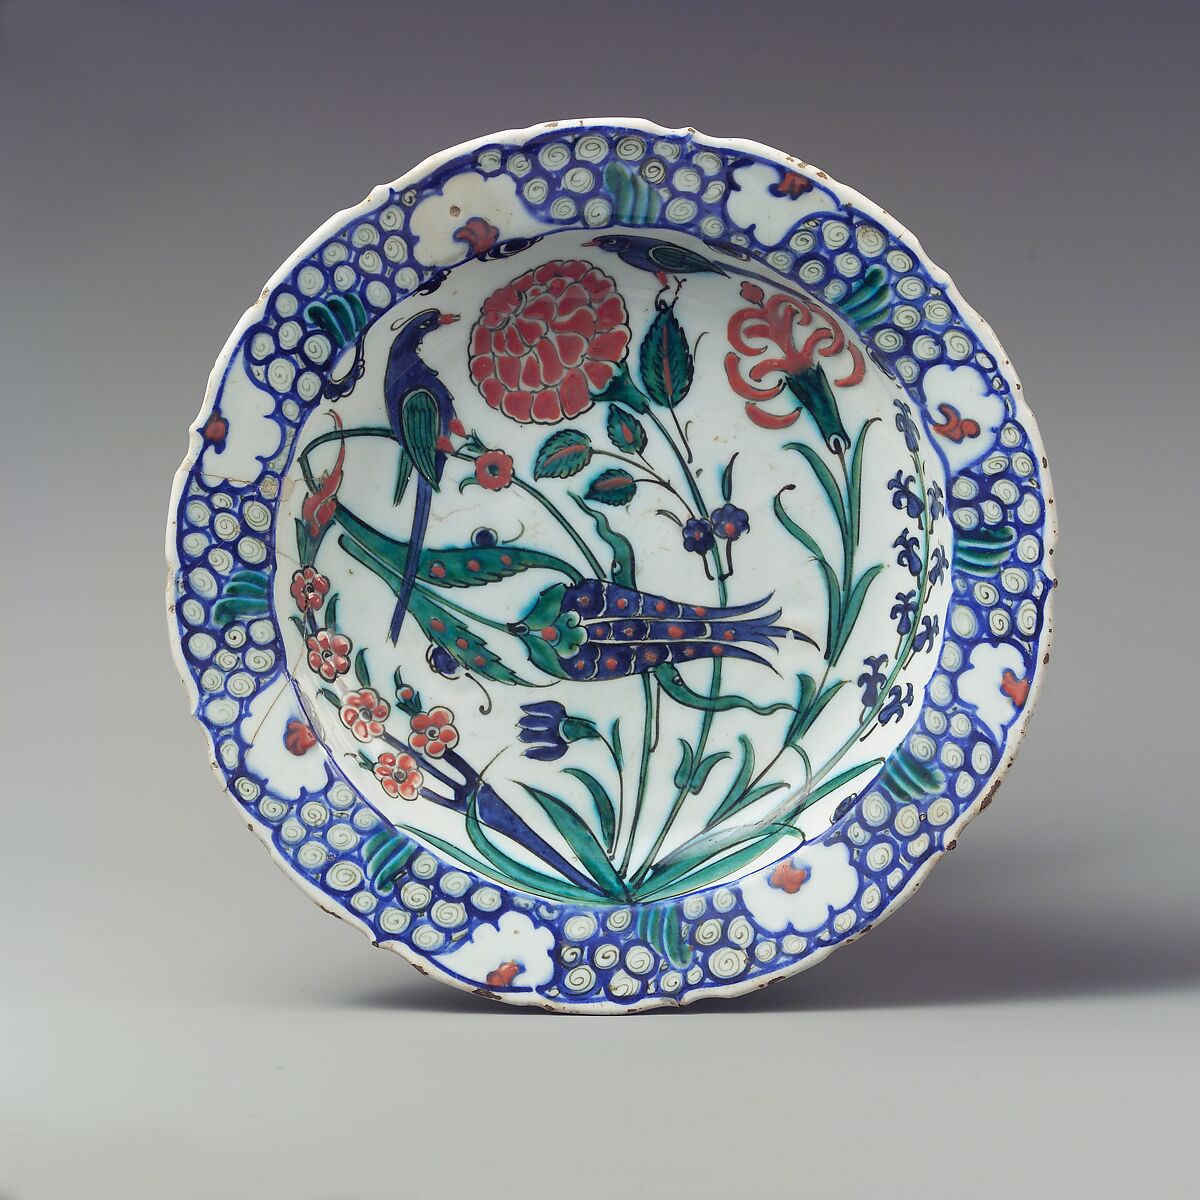 Dish Depicting Two Birds among Flowering Plants